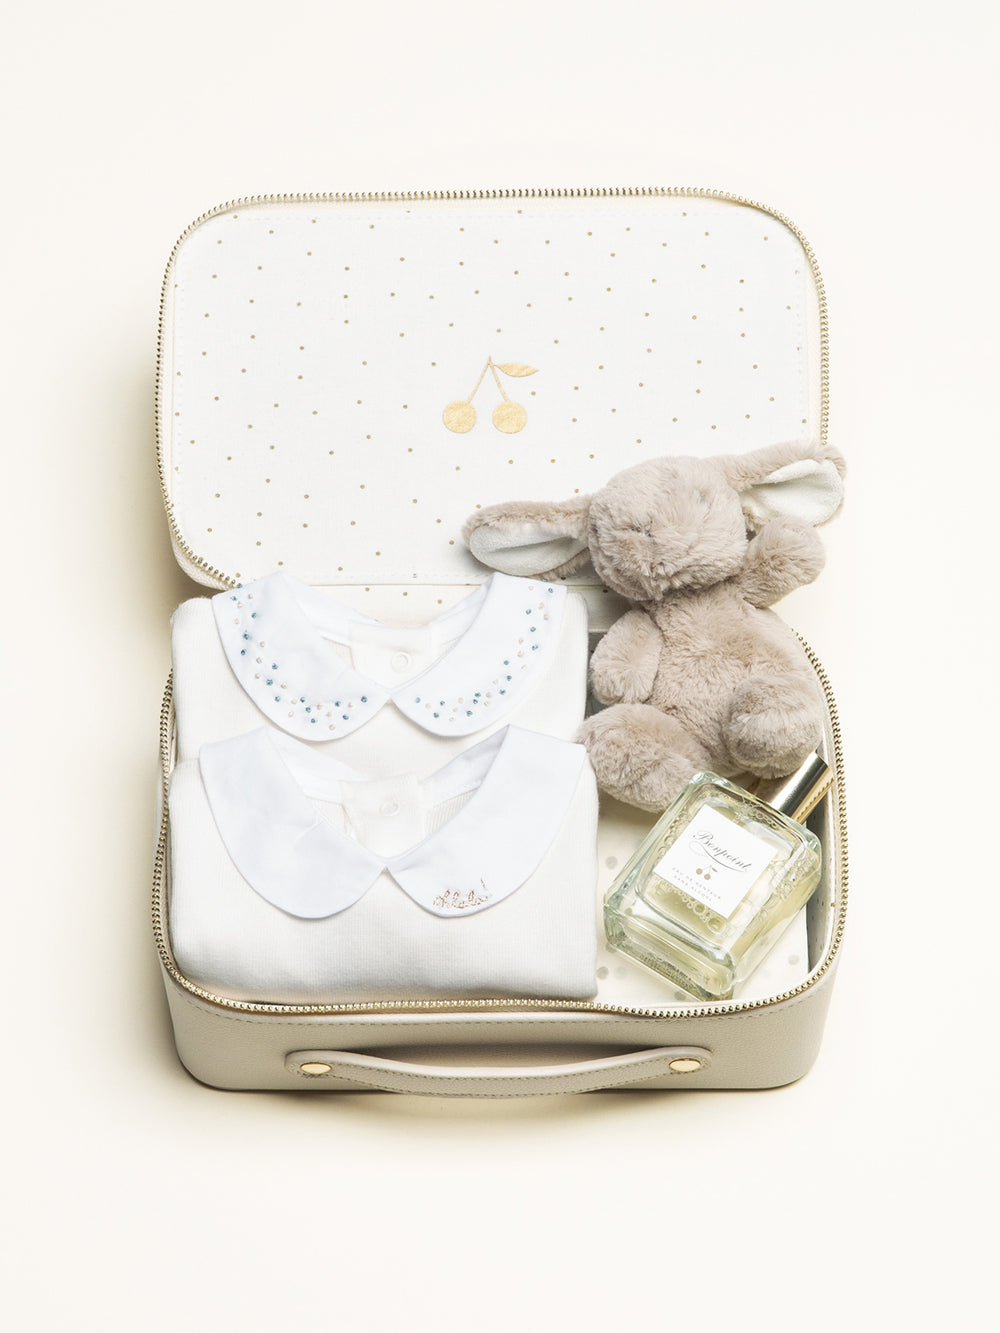 Small bodysuits case with perfume